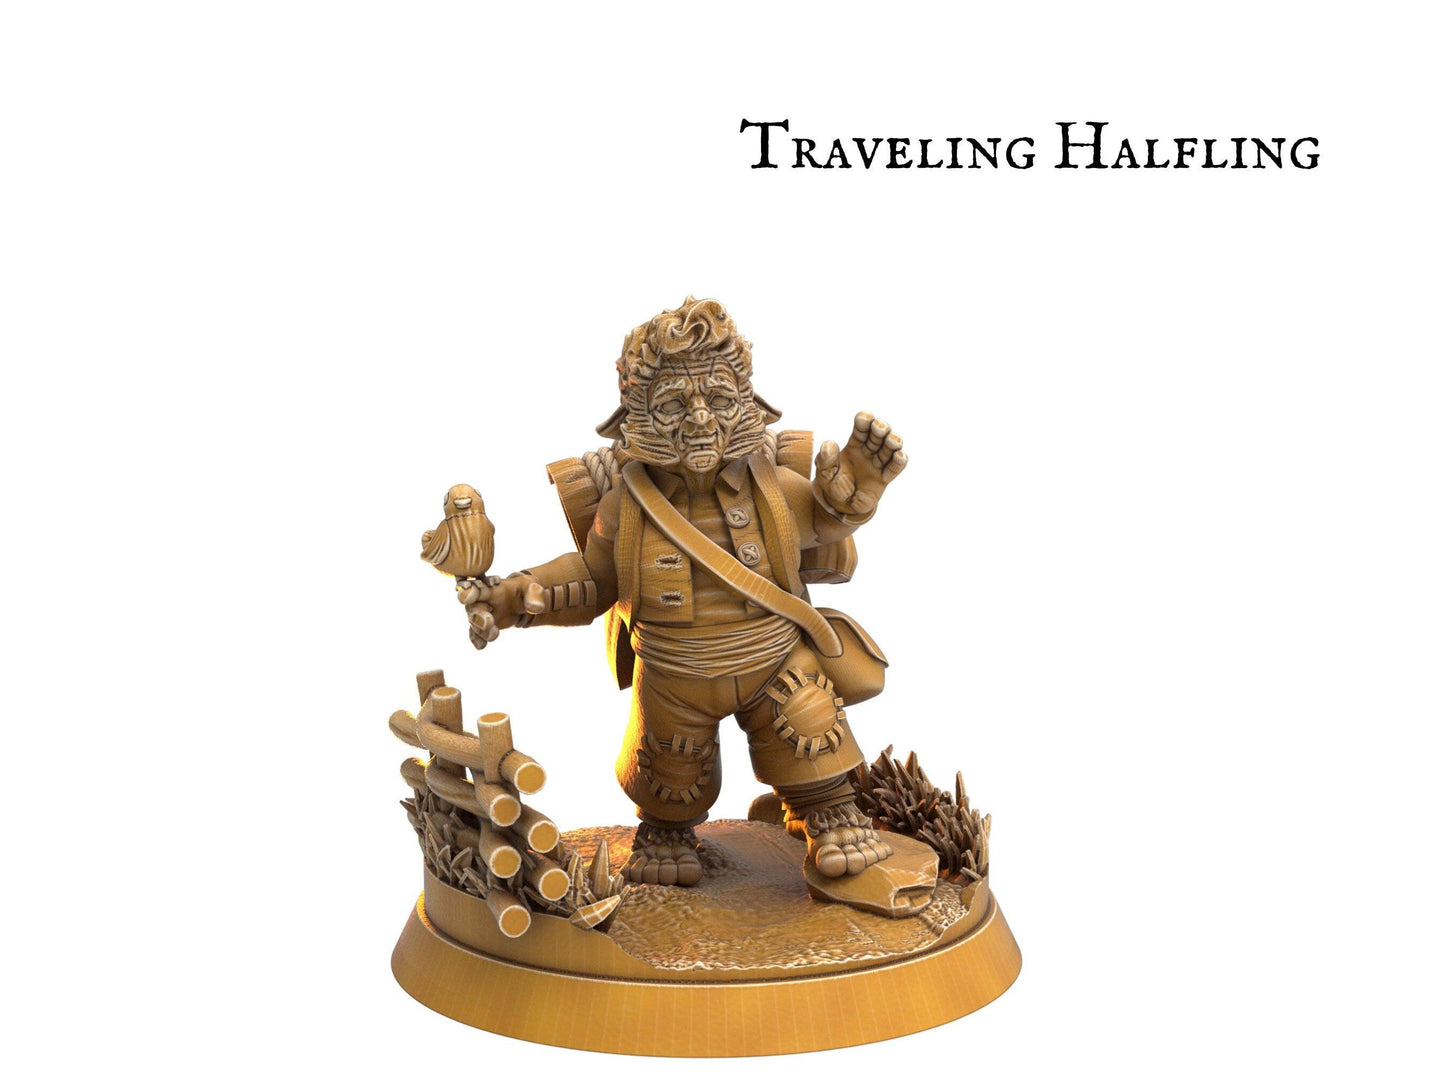 Male Bowman Halfling Miniature - 8 Poses - 32mm scale Tabletop gaming DnD Miniature Dungeons and Dragons, male dnd halfling archer - Plague Miniatures shop for DnD Miniatures